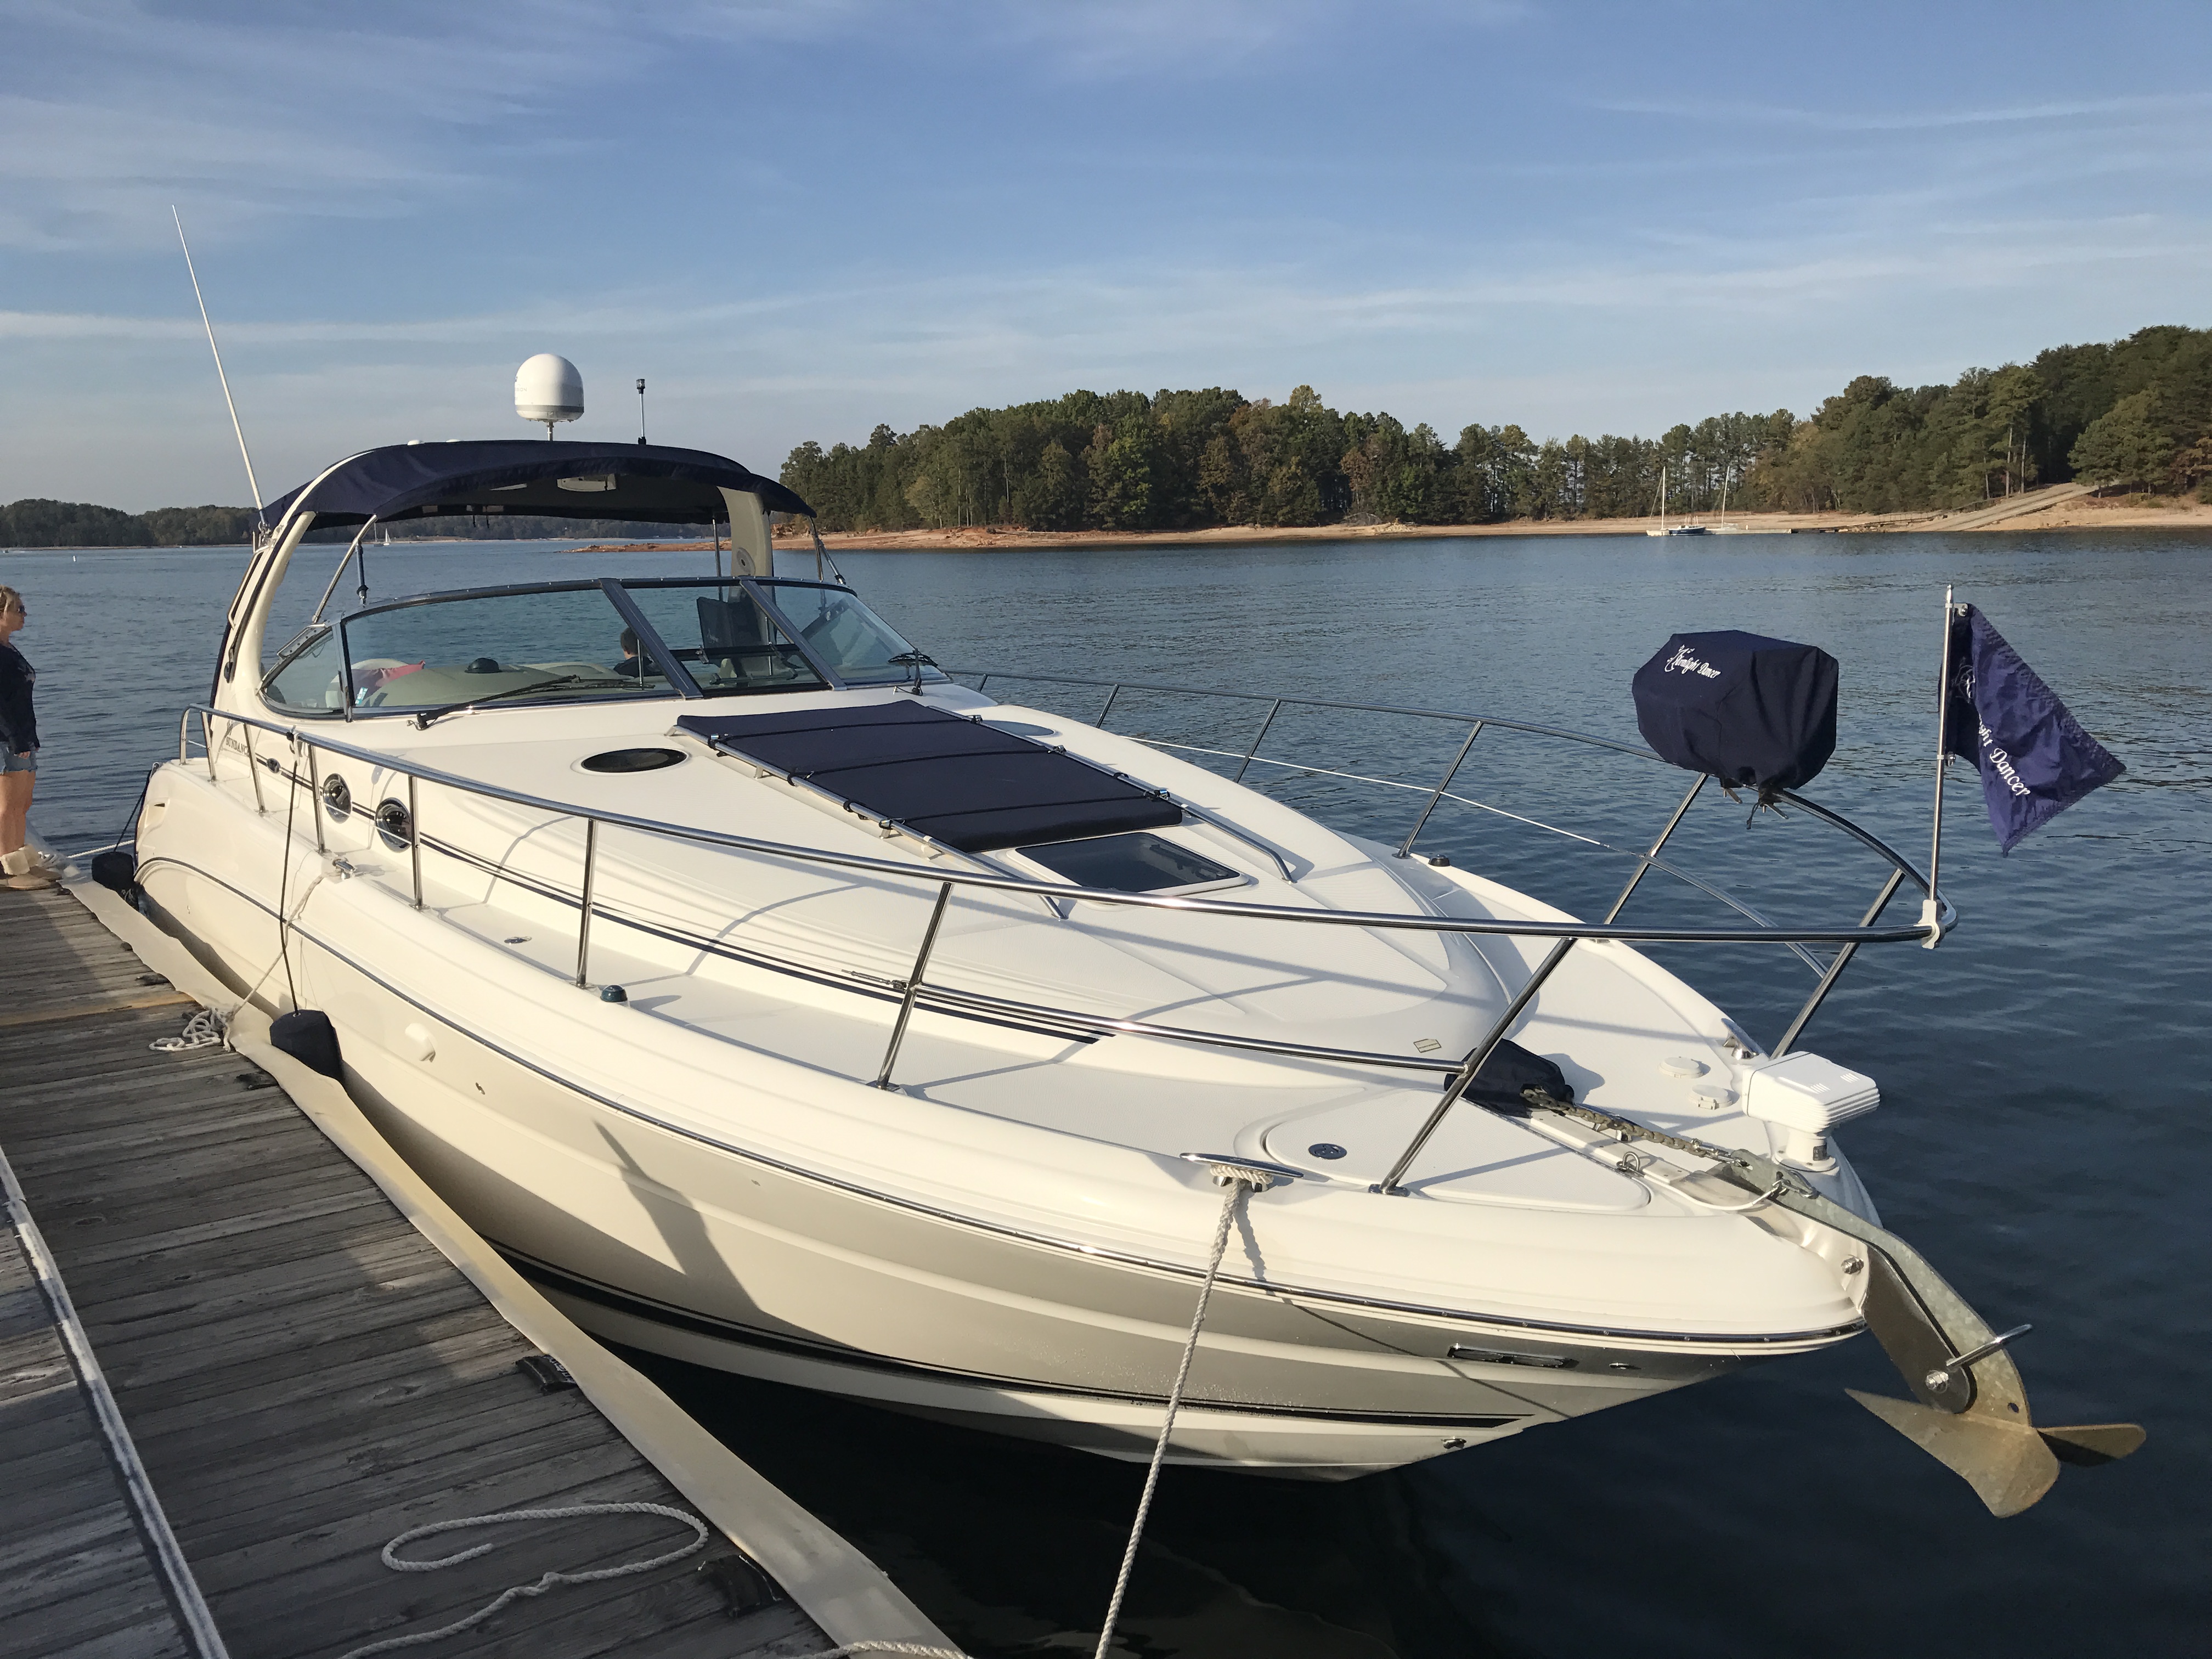 2005 39 foot Sea Ray Sundancer Power boat for sale in Gainesville, GA - image 6 